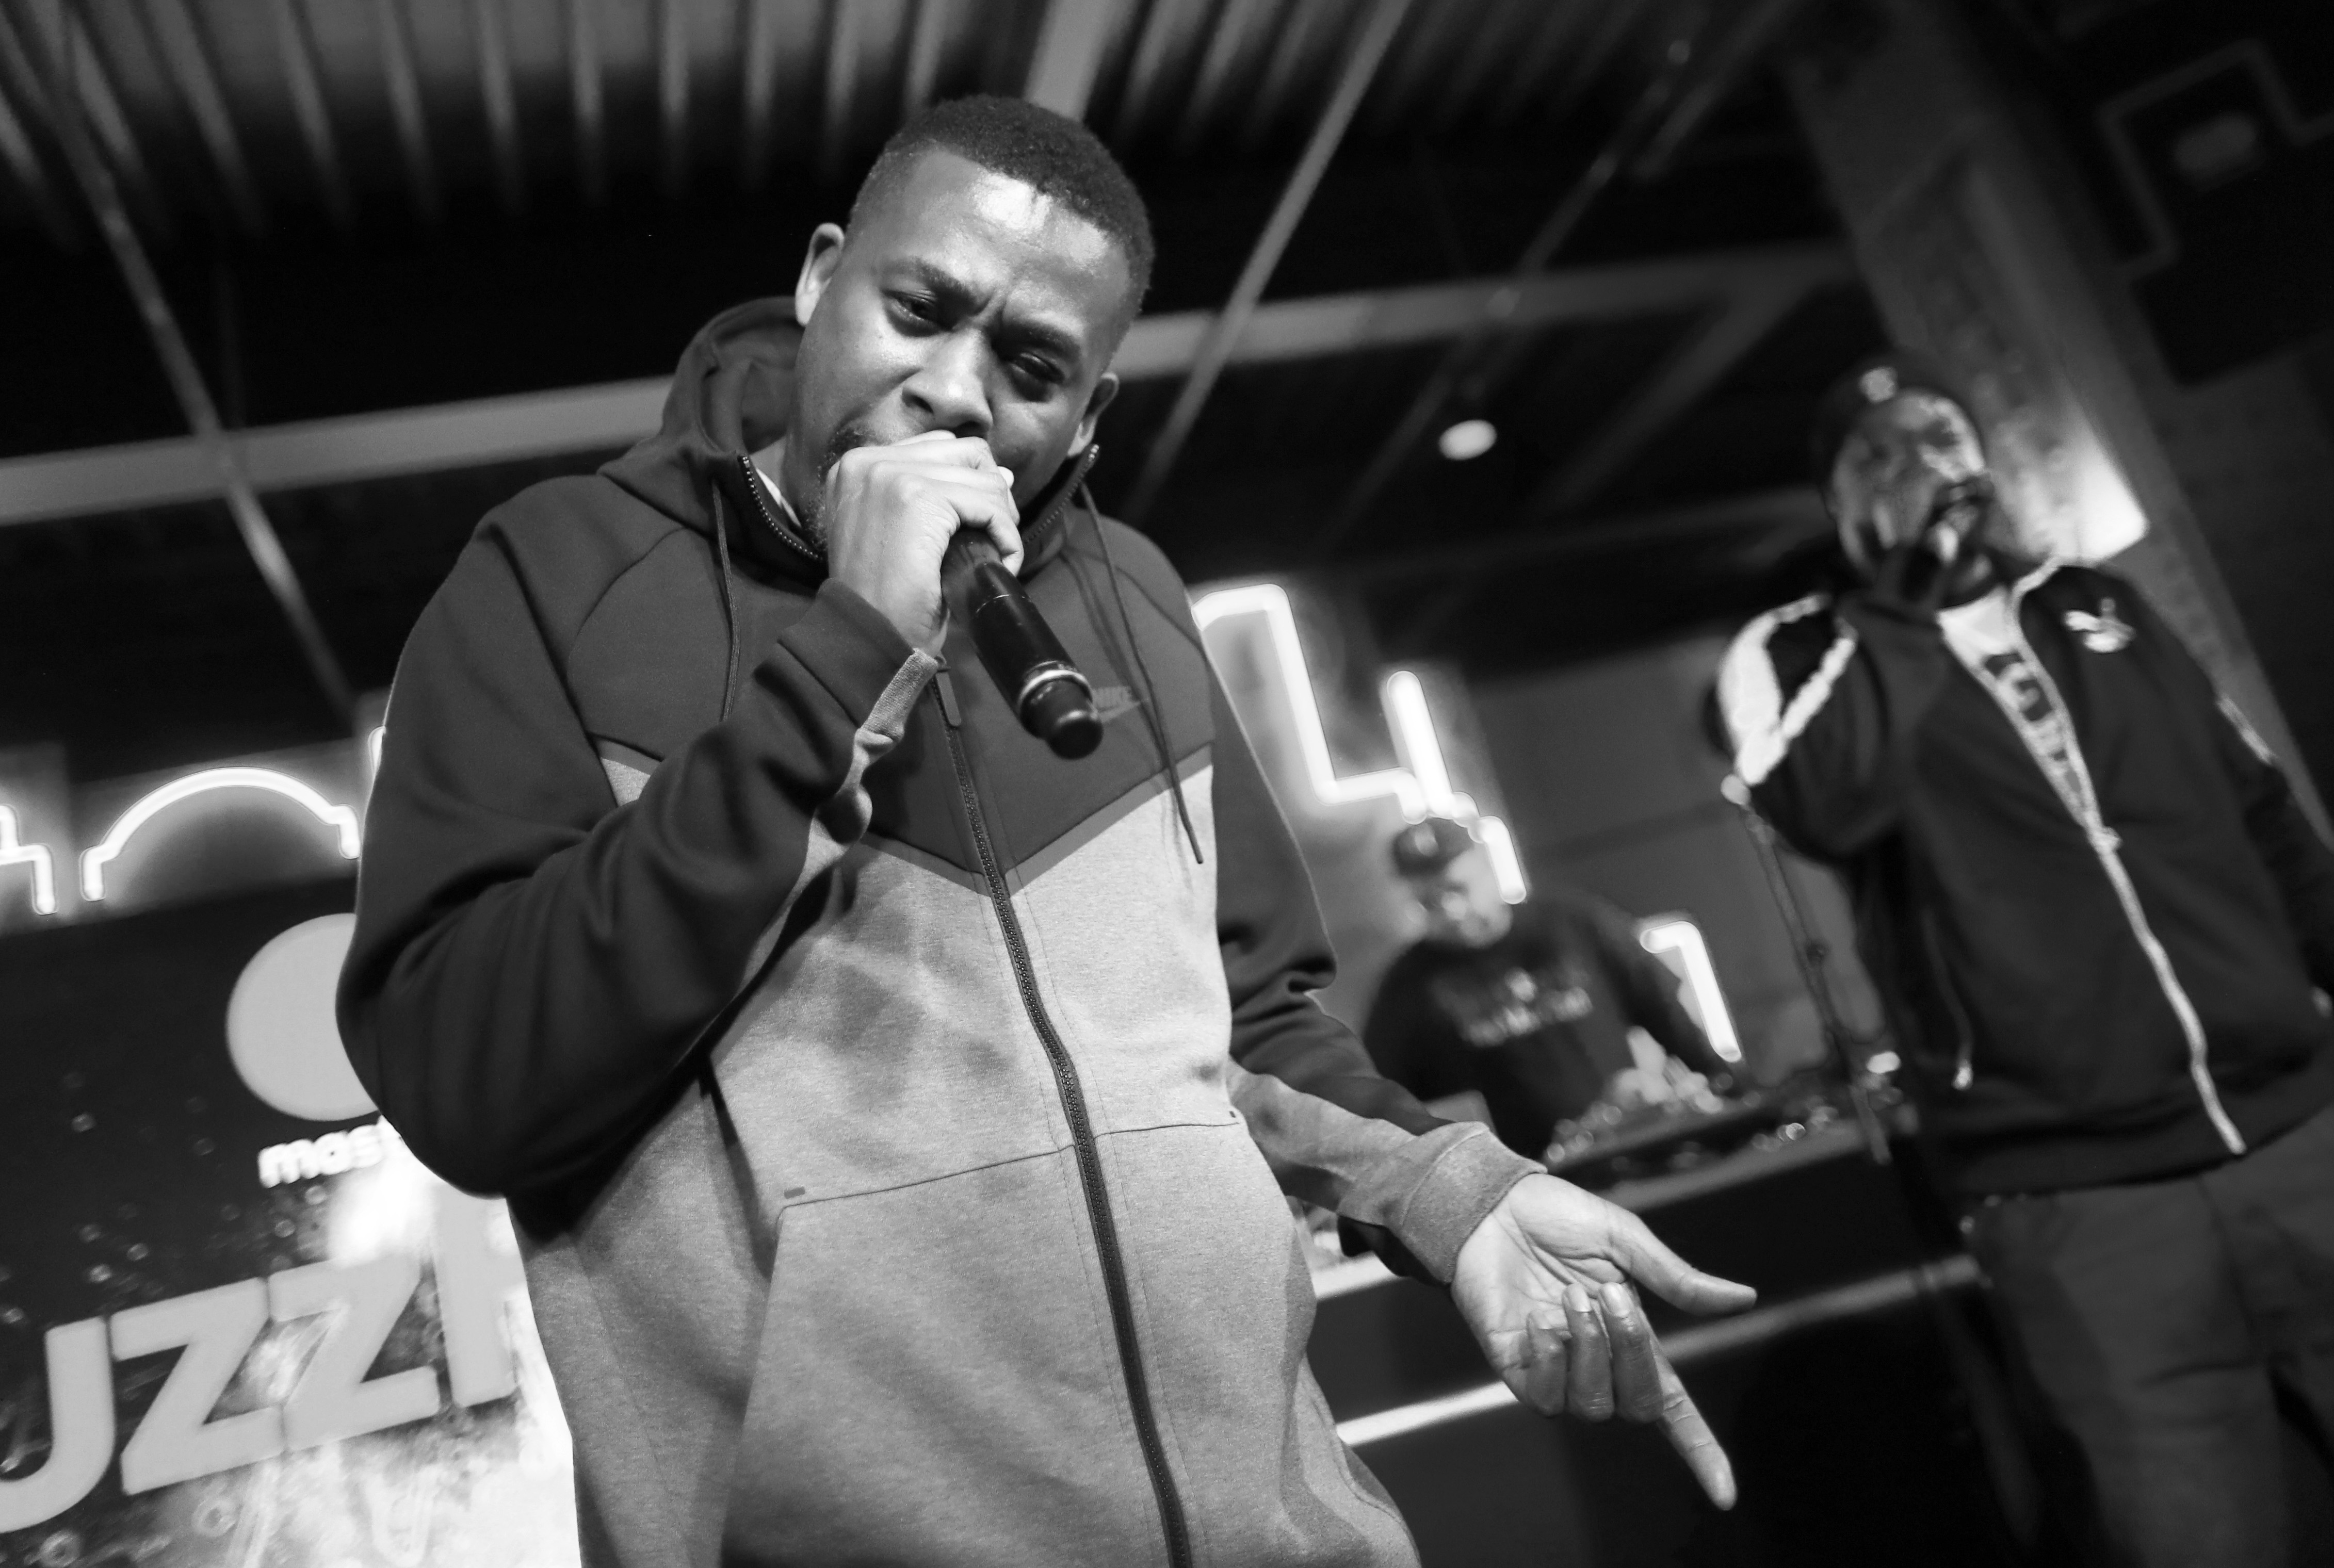 GZA Compares Gun Violence In Hip Hop To Wildfire: “Put Them Out Or They Spread”